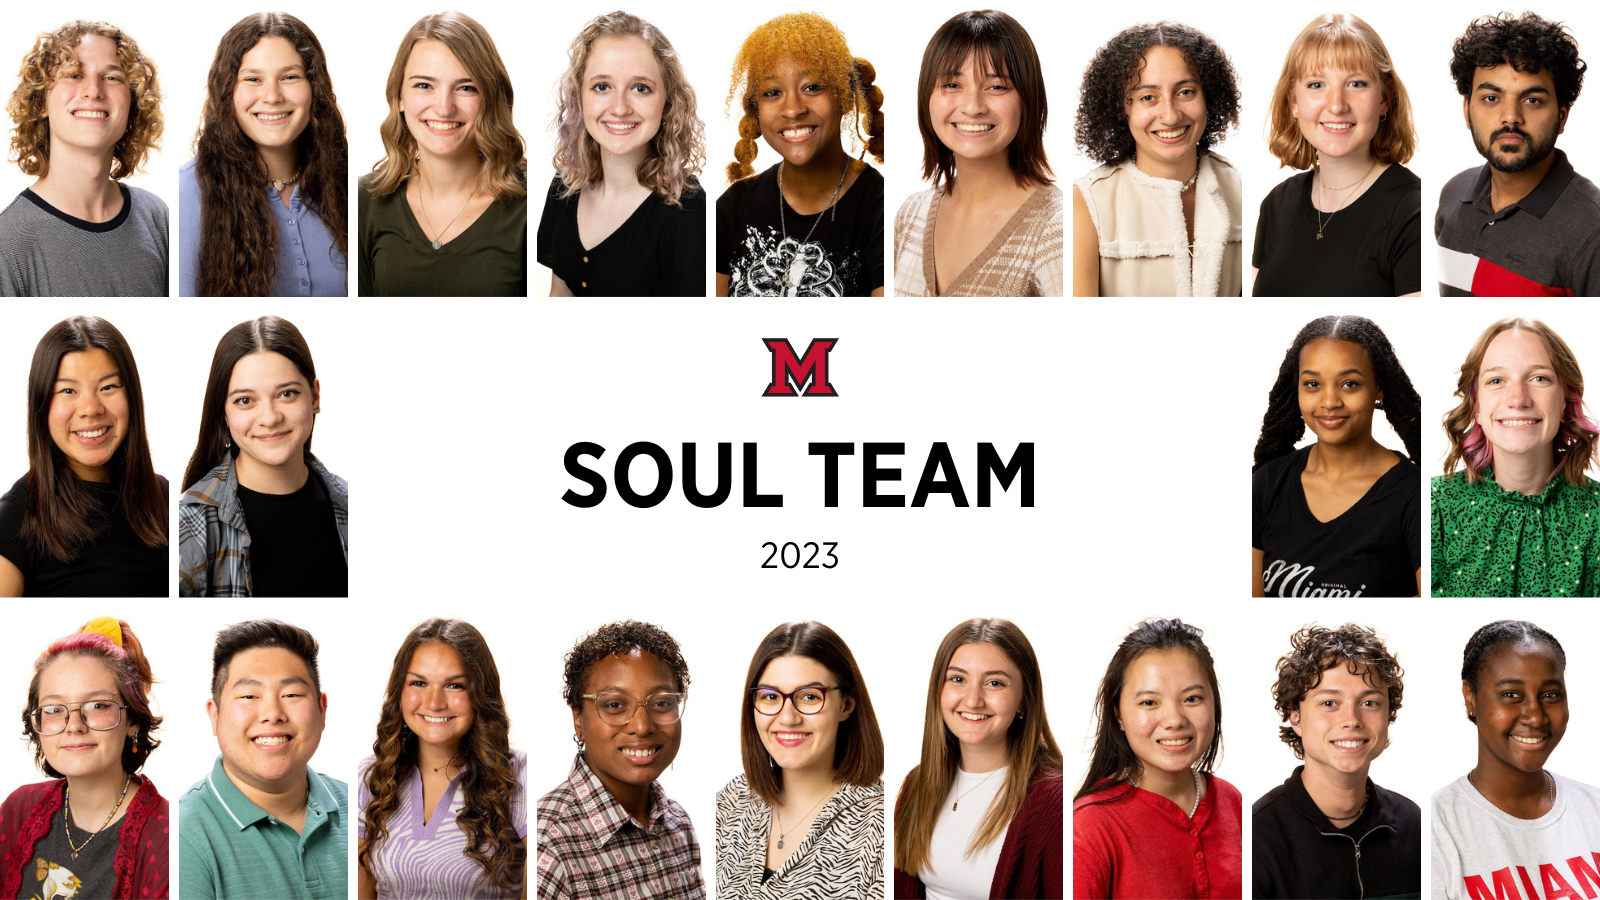 2023 SOUL Team. Headshots for a diverse group of 22 students.